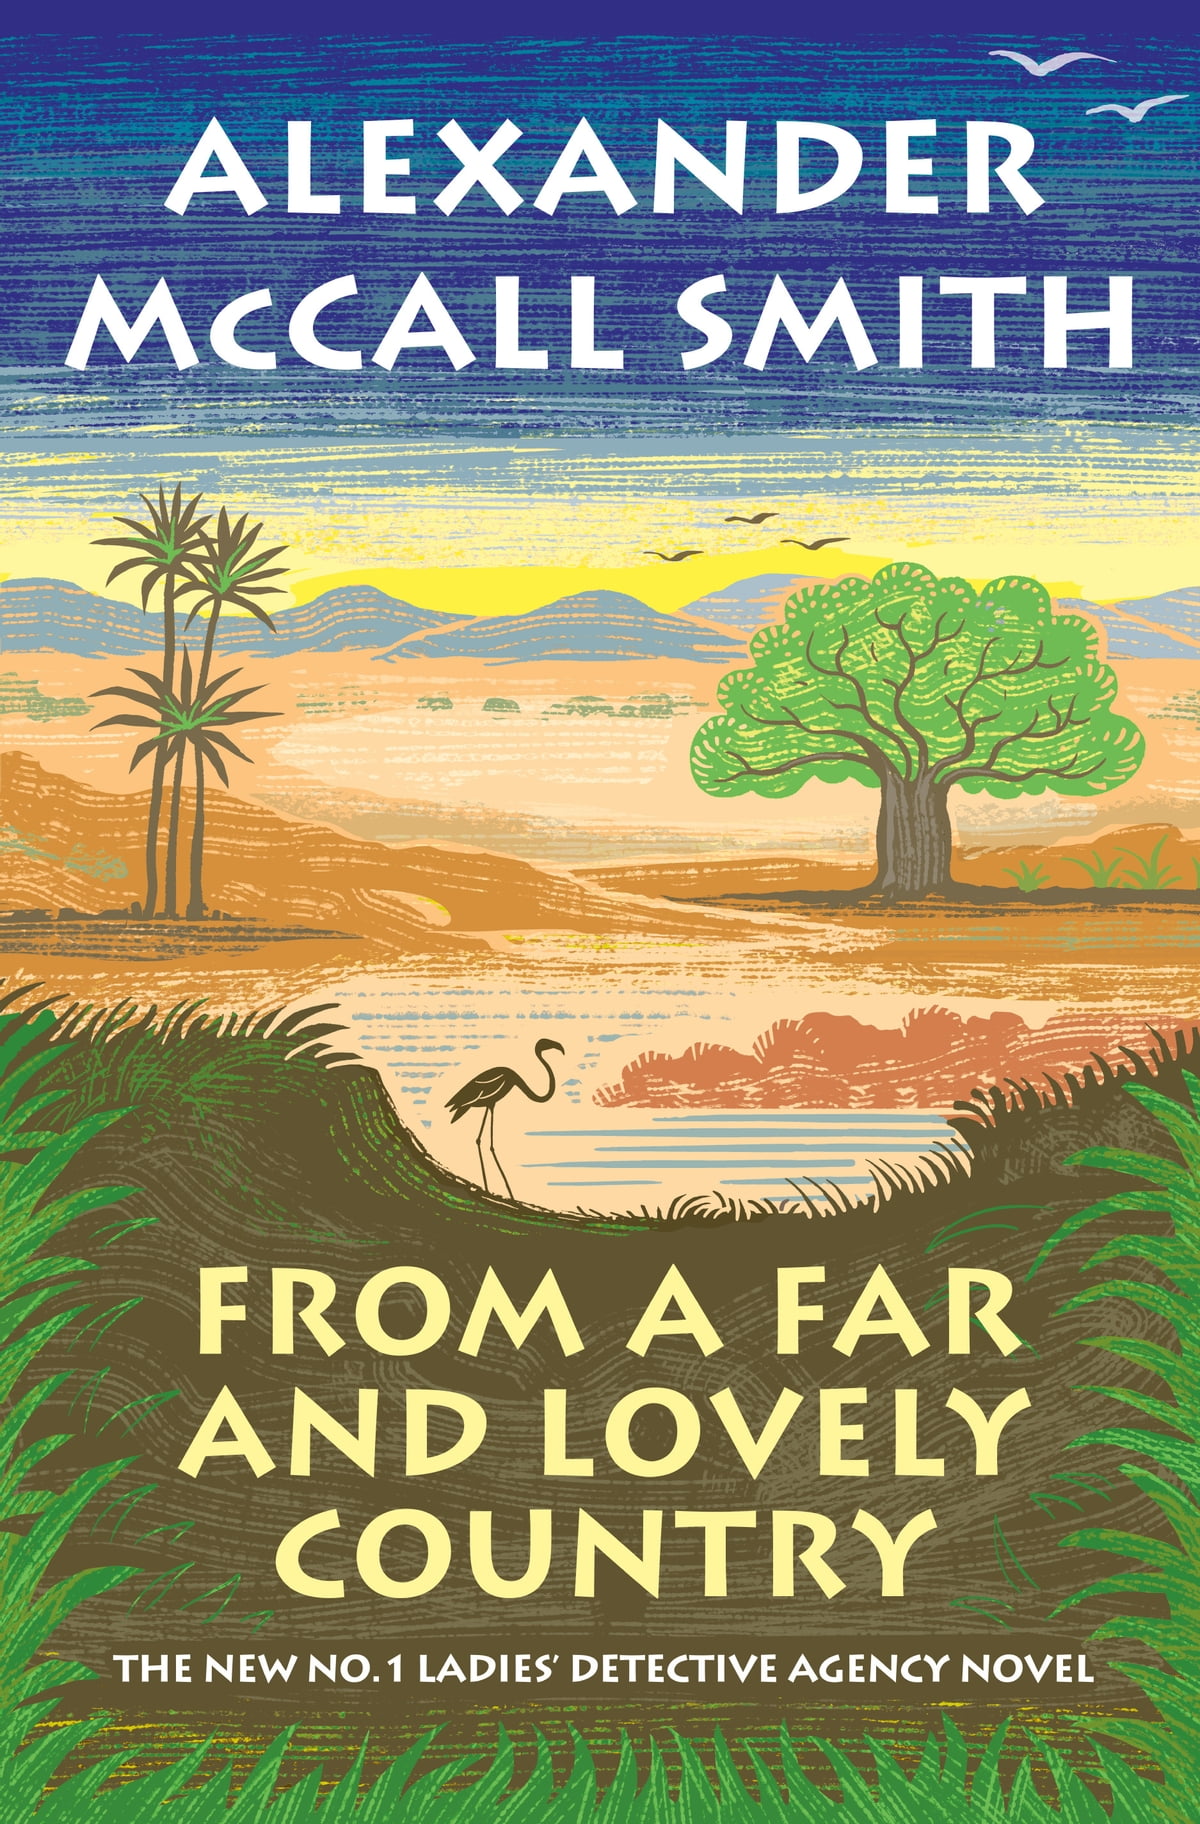 From a Far and Lovely Country by Alexander McCall Smith